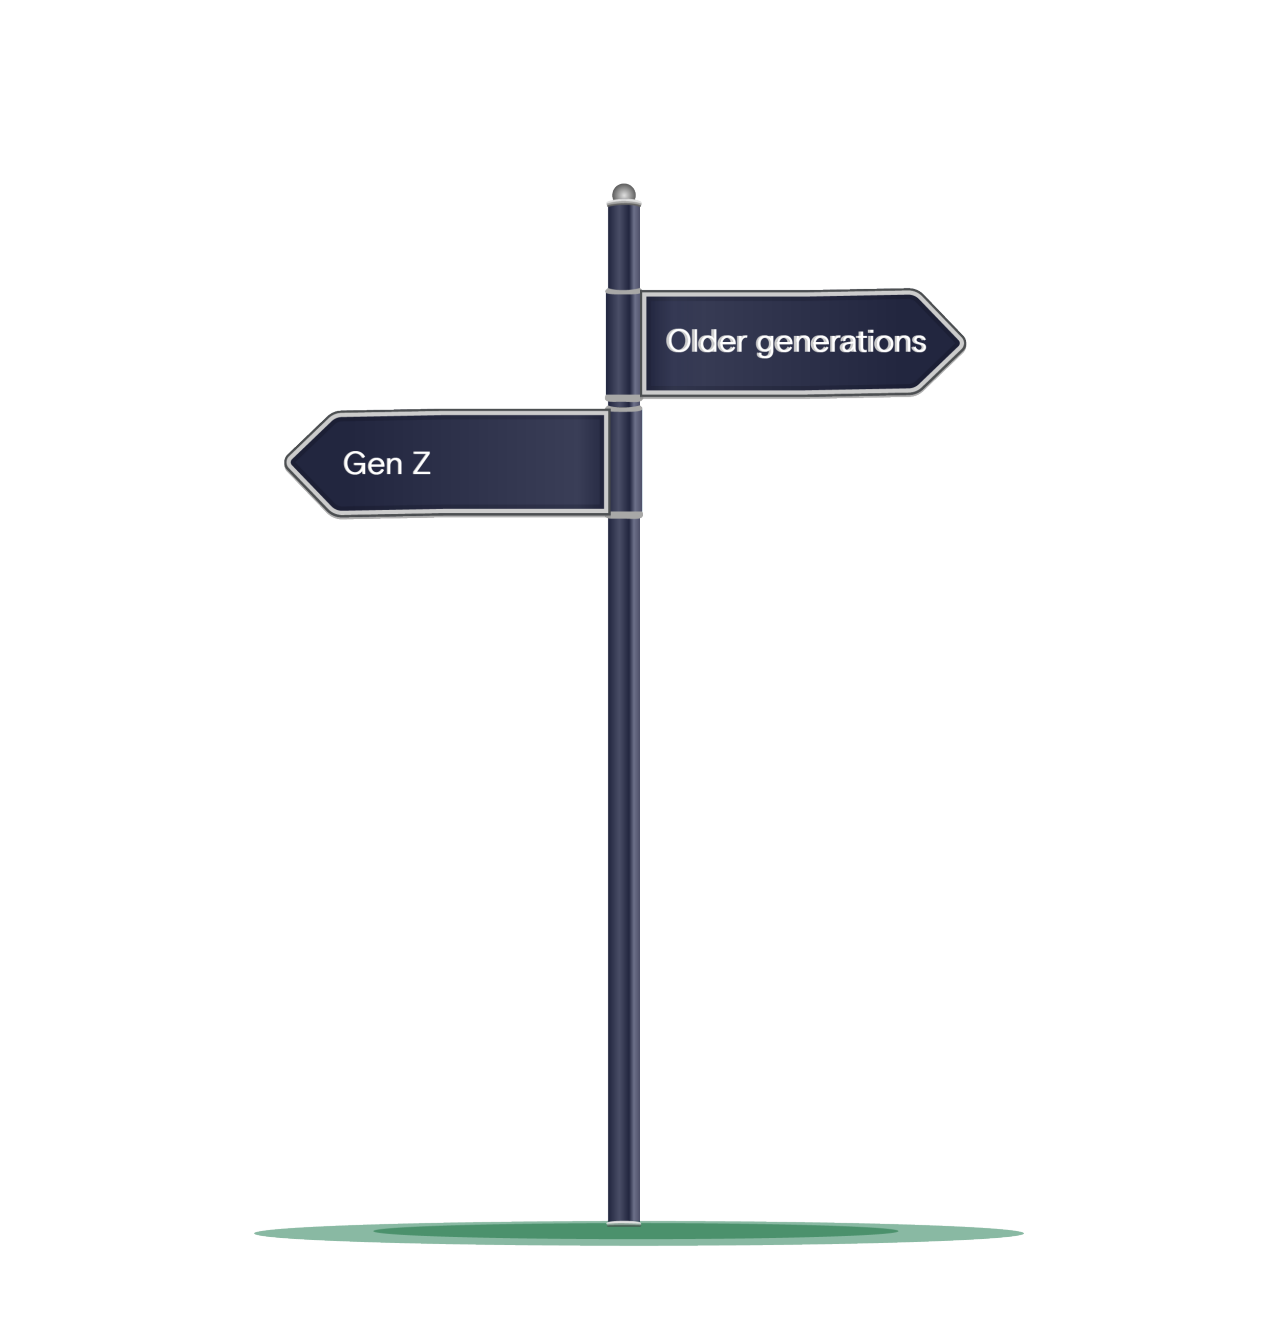 Image shows a dark blue signpost. There is a panel which points to the left with white text which reads 'Gen Z'. There is a panel which points to the right above the other panel and reads 'Older generations' in white text.